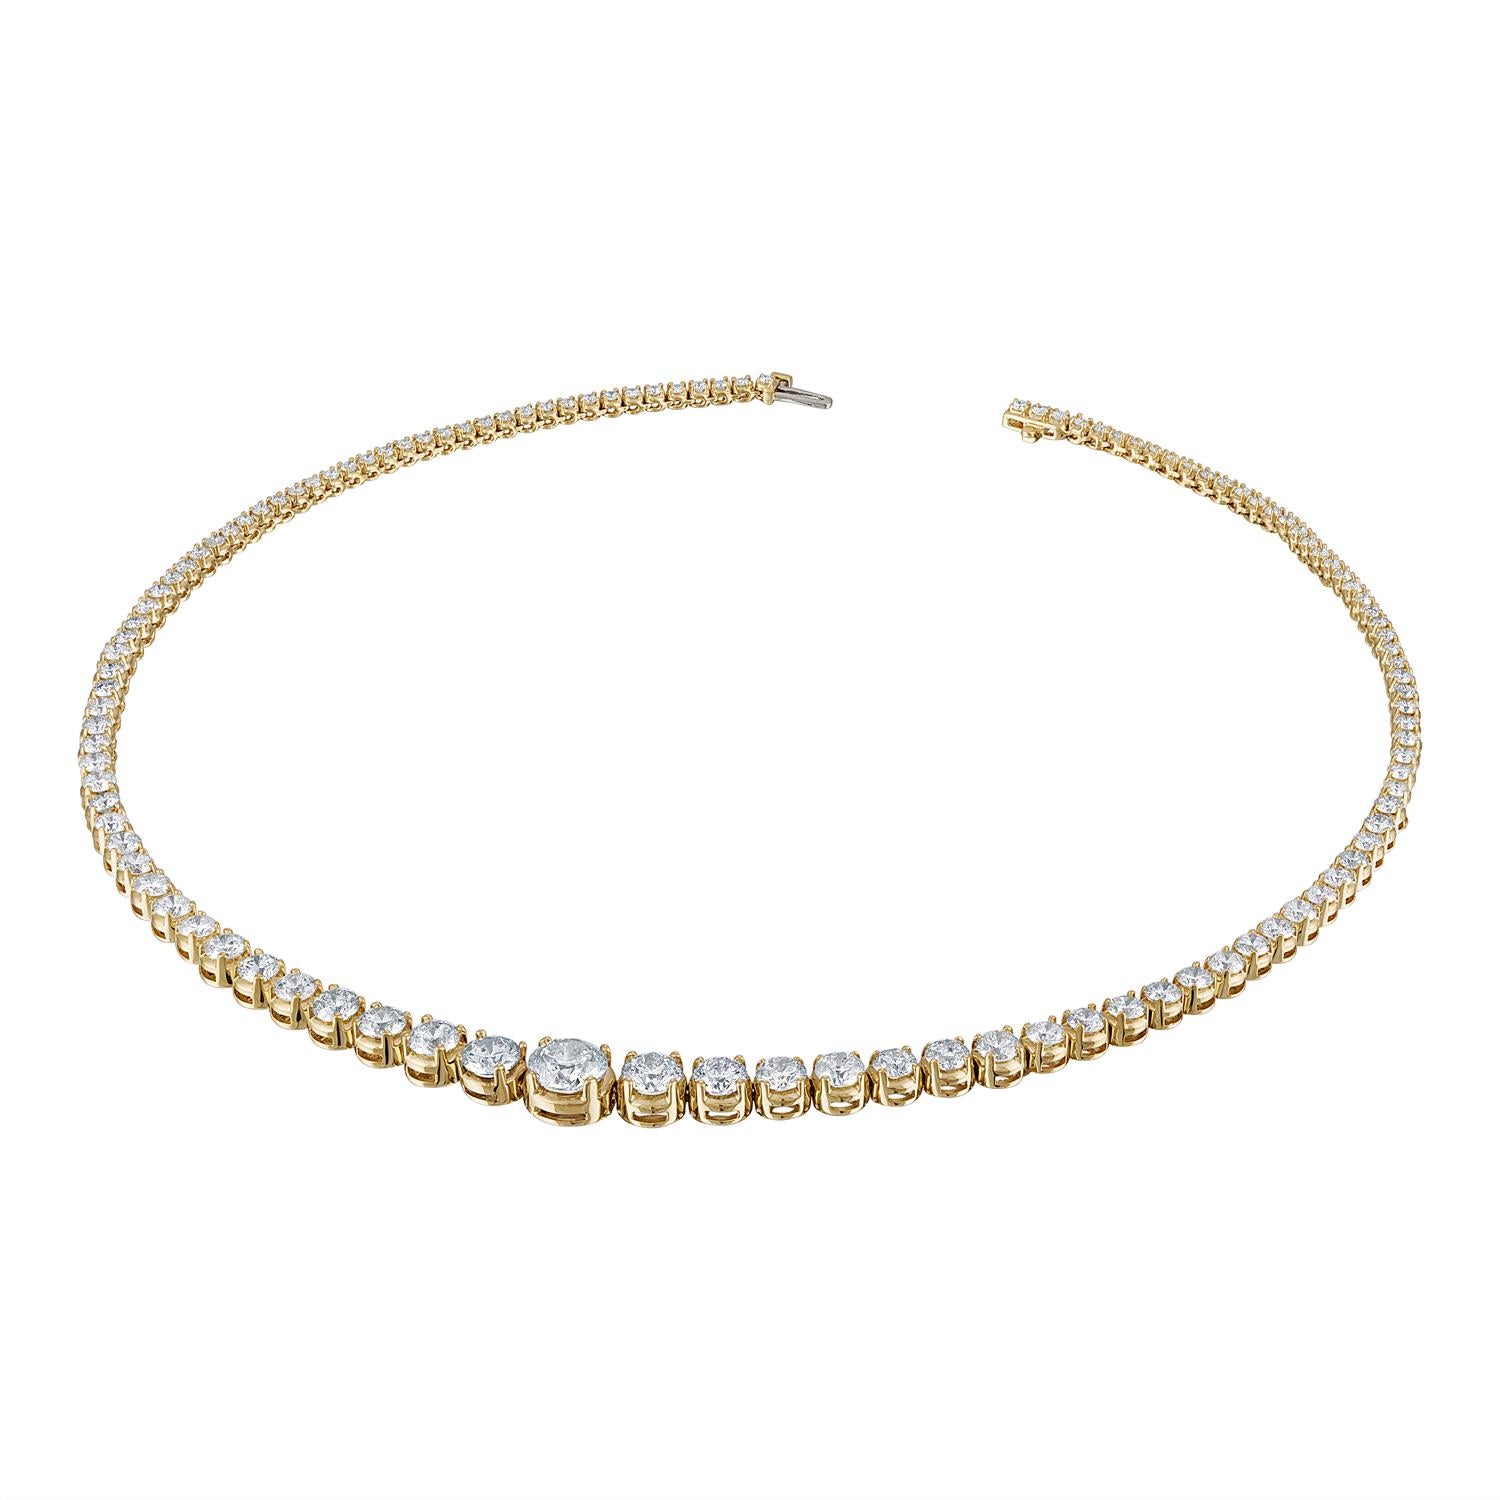 Contemporary Yellow Gold Tennis Necklace of over 18 Carat of Round Diamonds